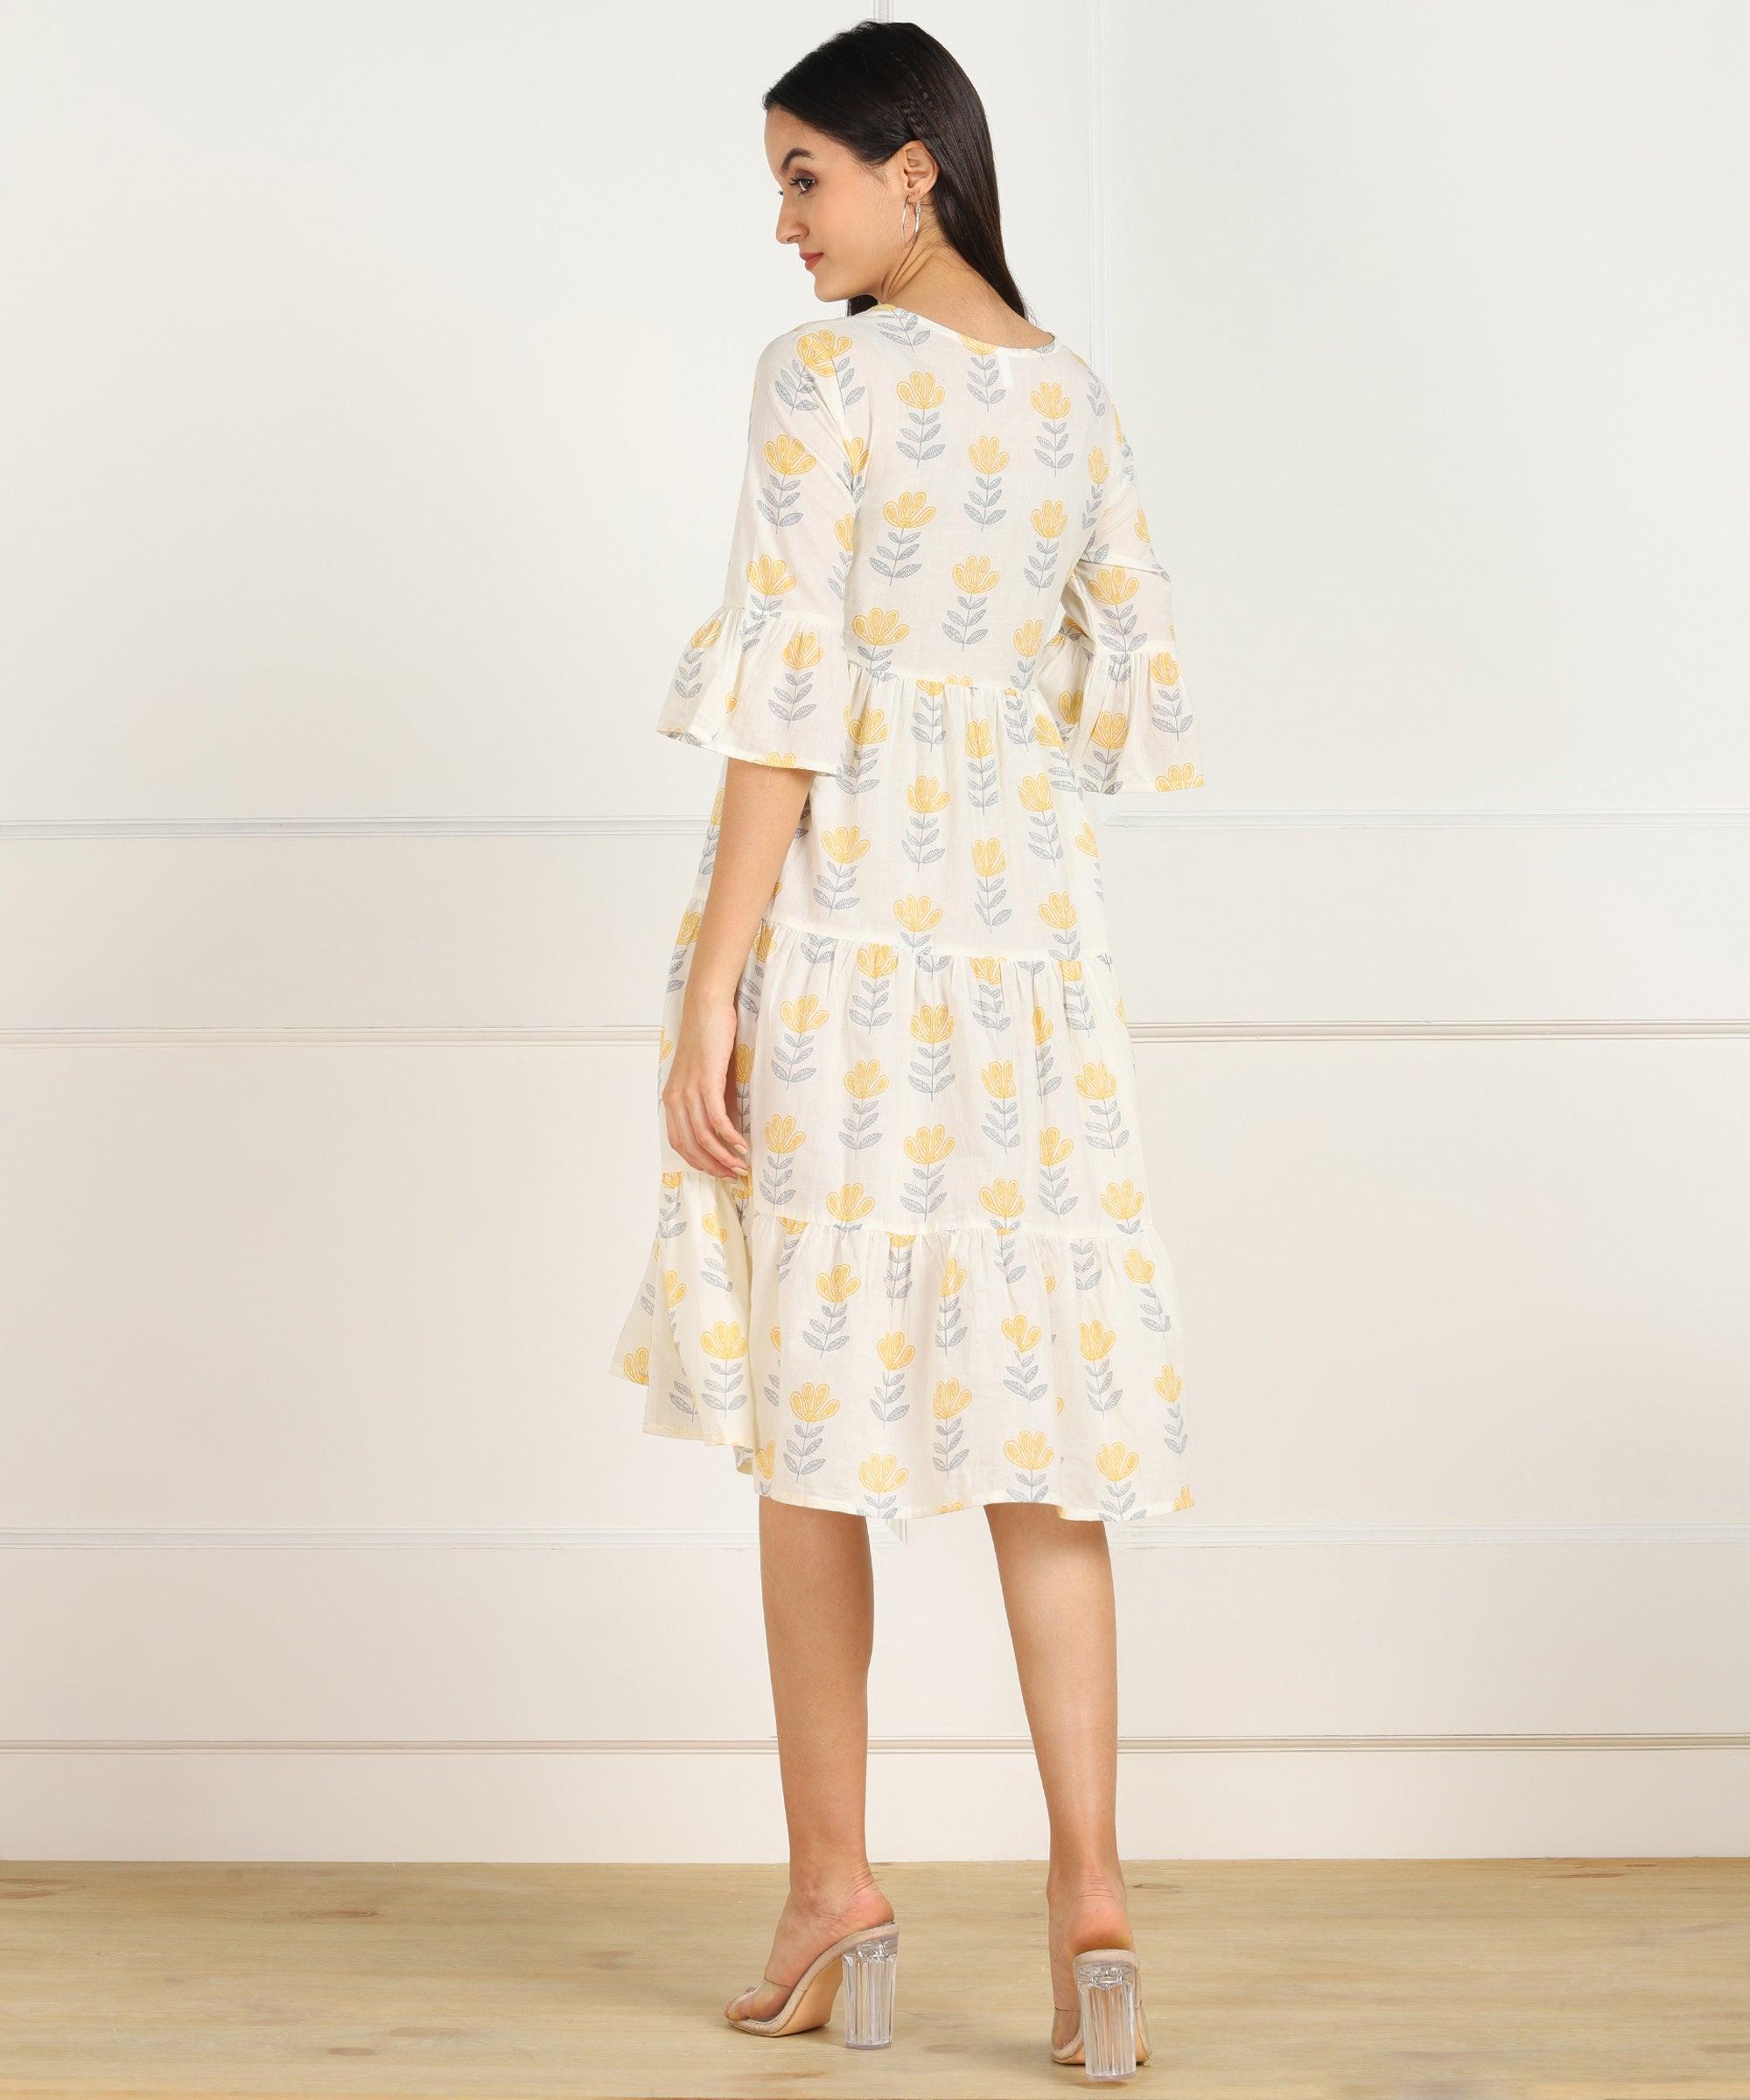 Znx White Yellow Floral Printed Flared Dress - Znxclothing